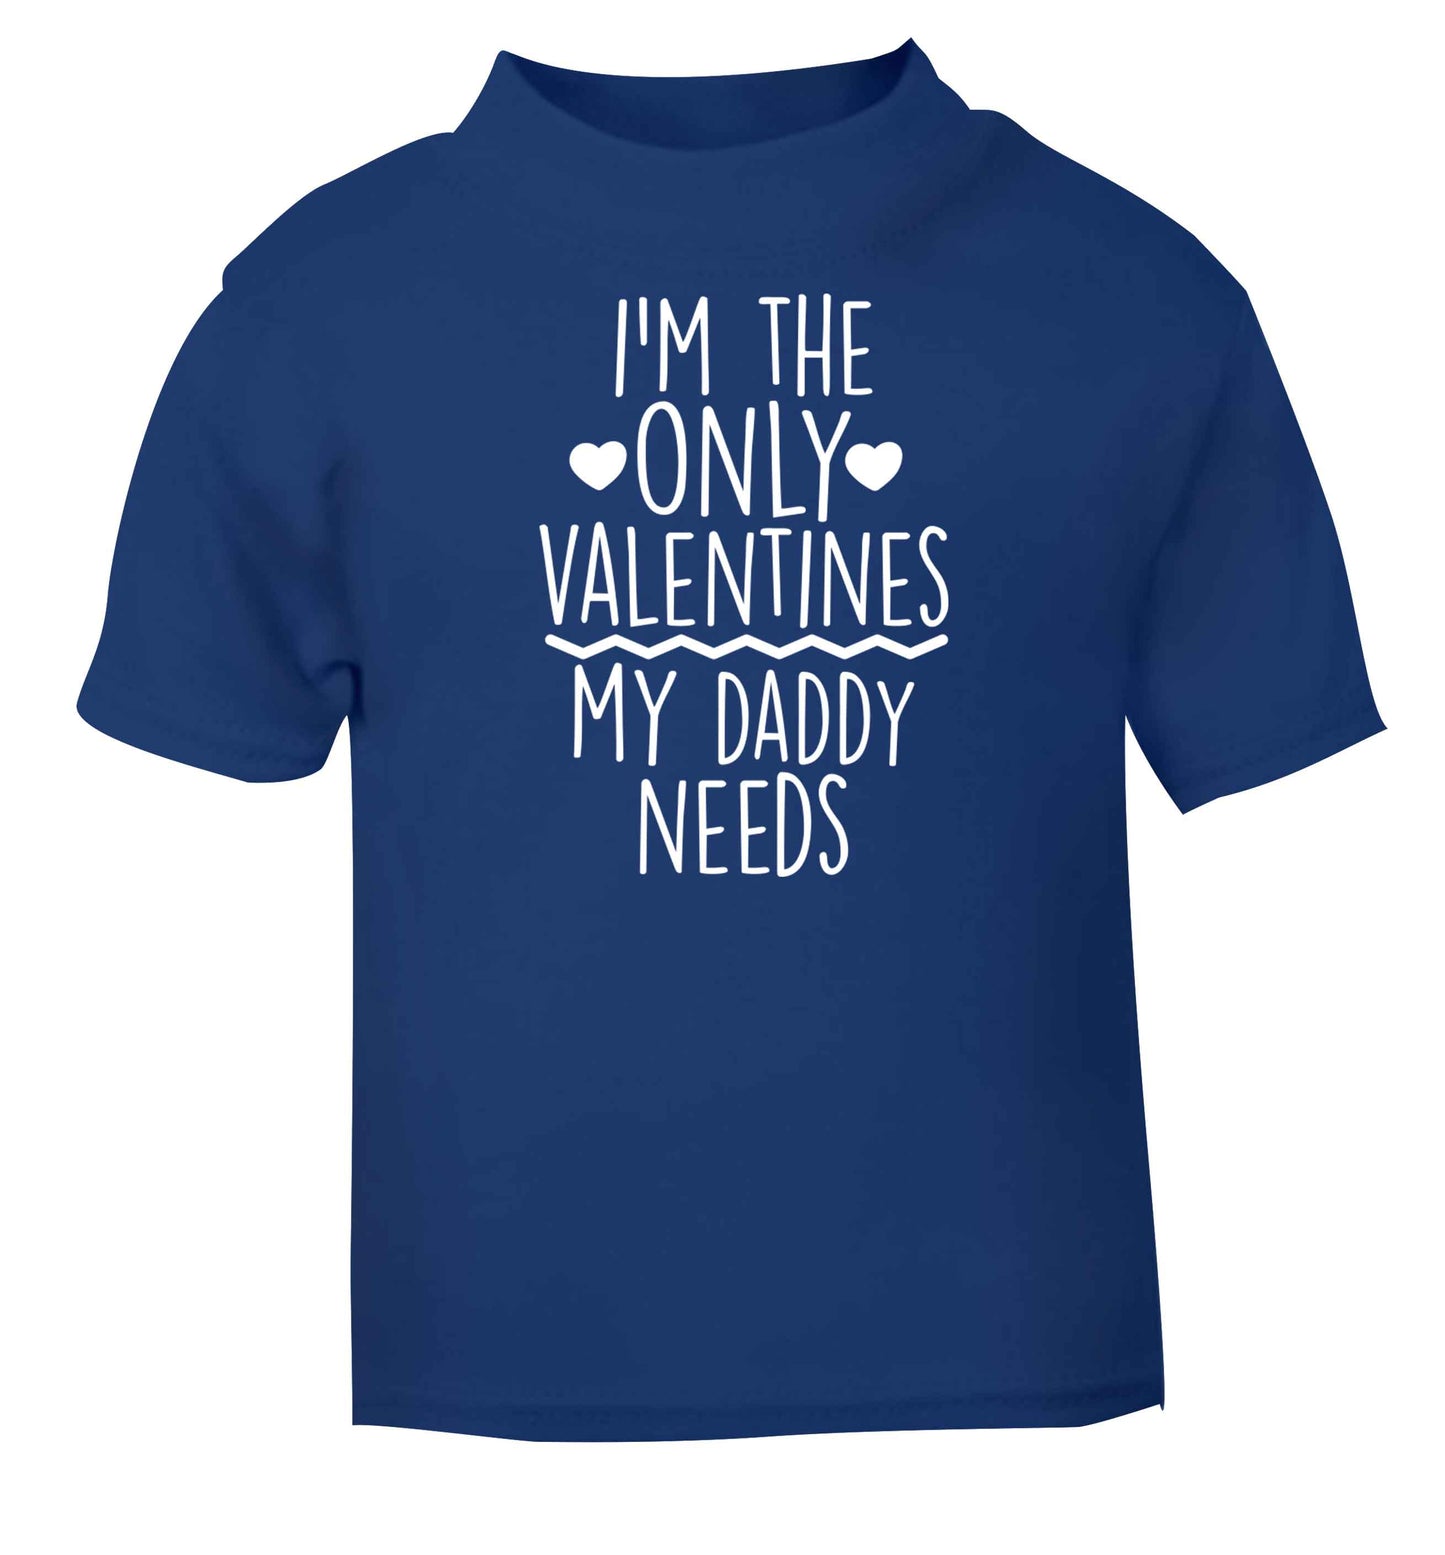 I'm the only valentines my daddy needs blue baby toddler Tshirt 2 Years